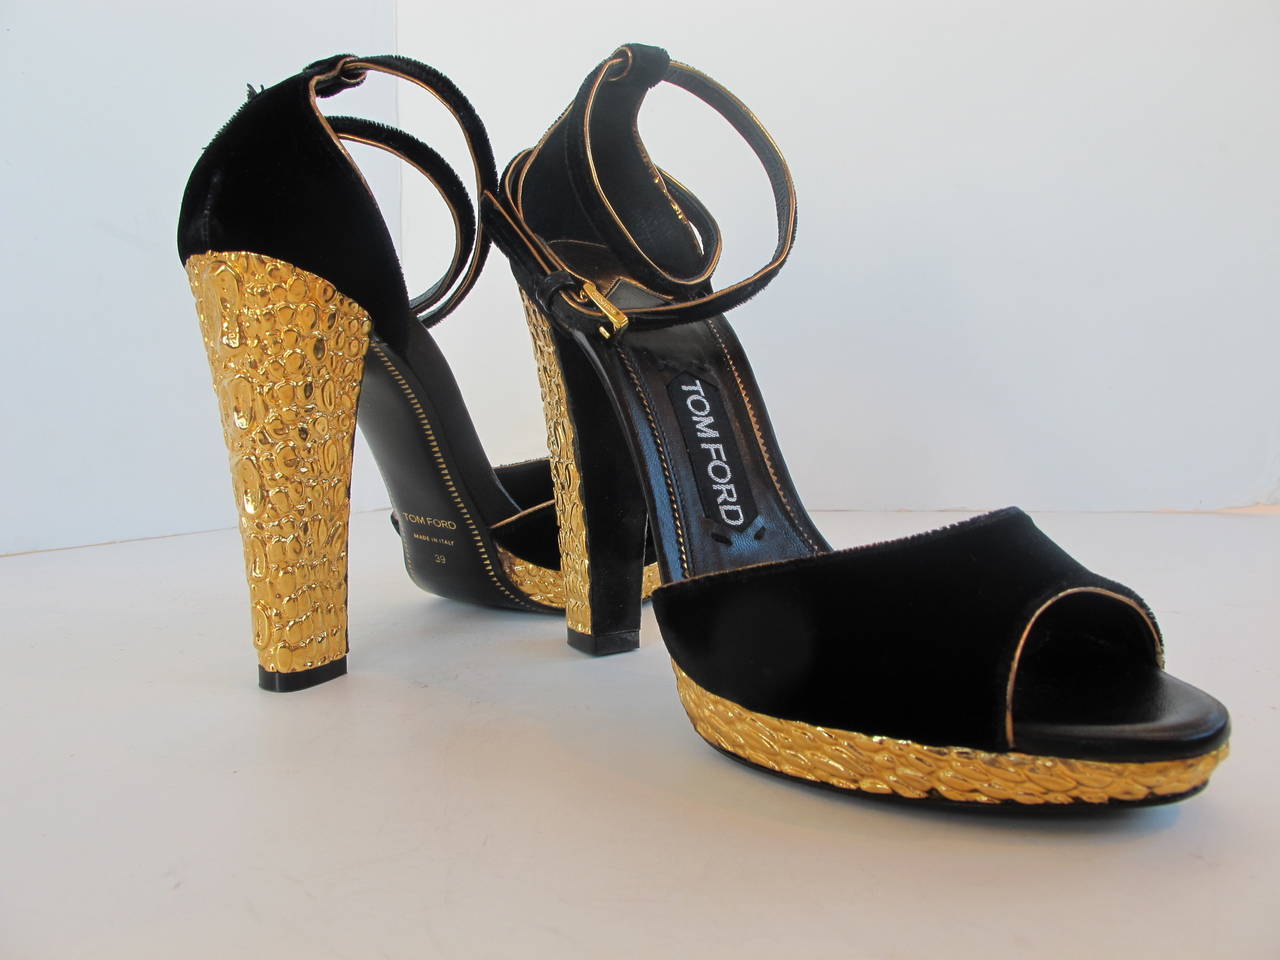 Over-the-top Tom Ford Sandals with gold metal with embossed alligator on metal. 5 inch heel. Platform 1/2 inch.